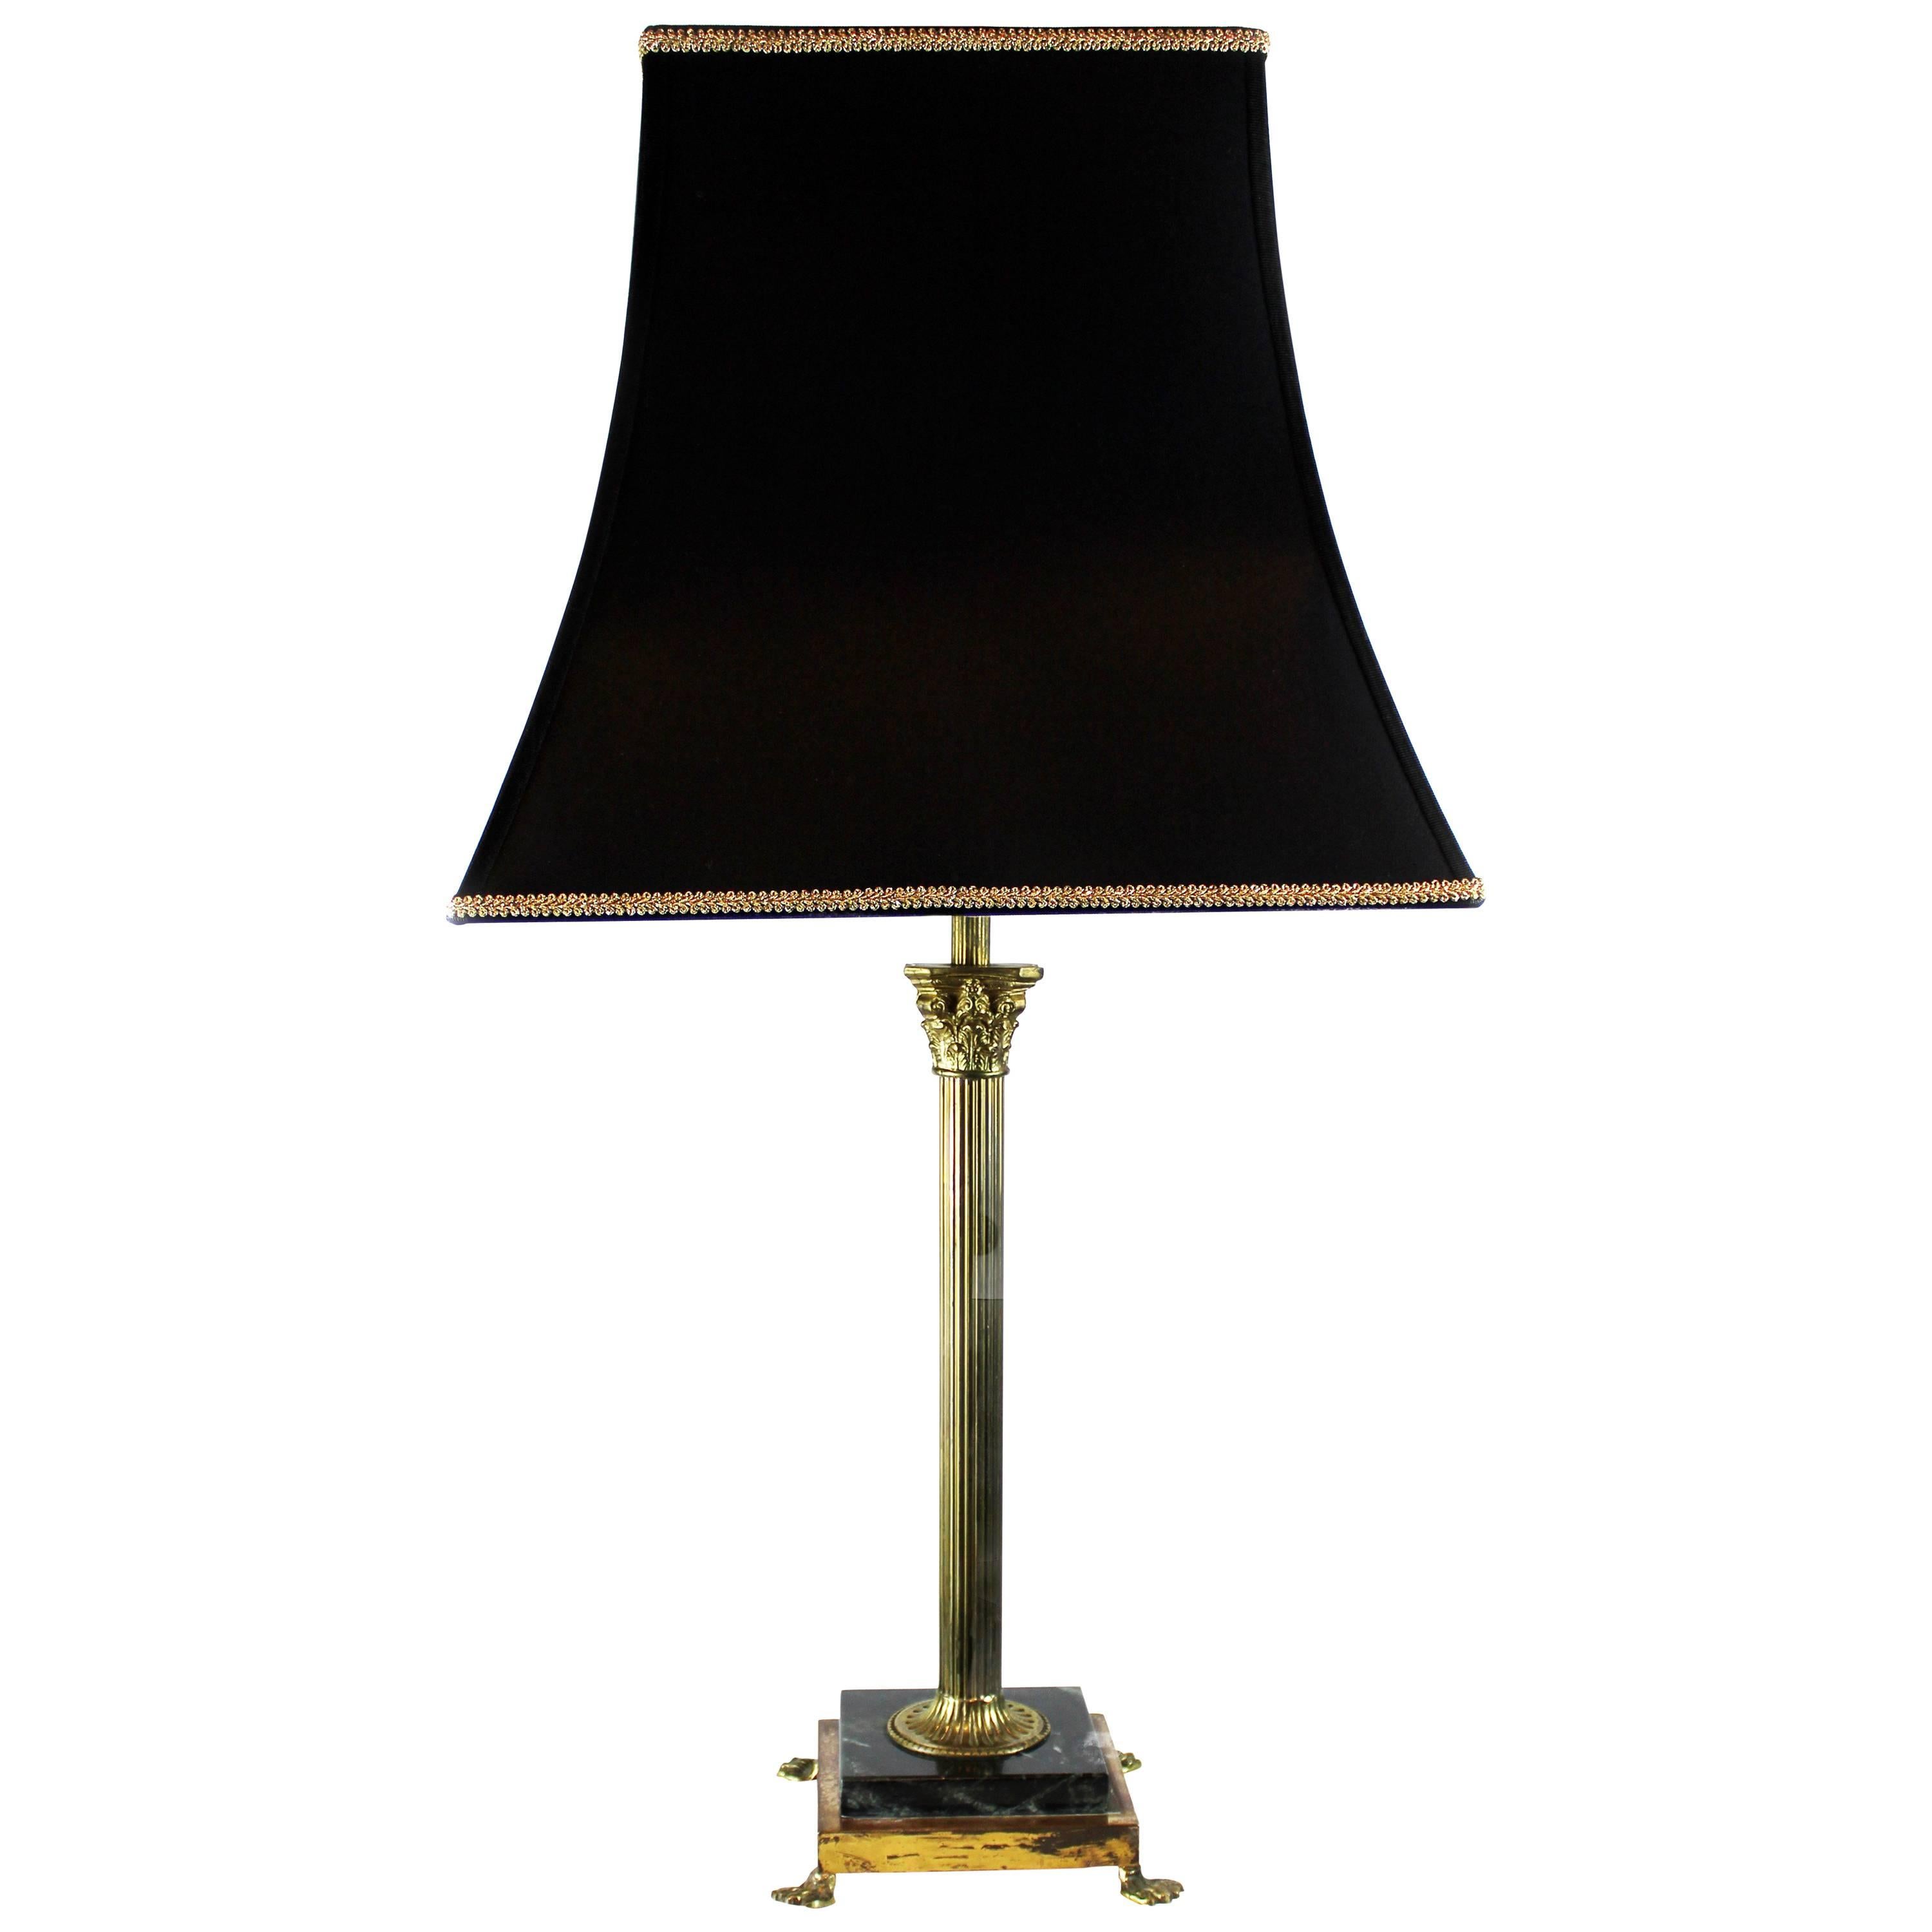 Italian Bronze and Marble Table Lamp, 1920s